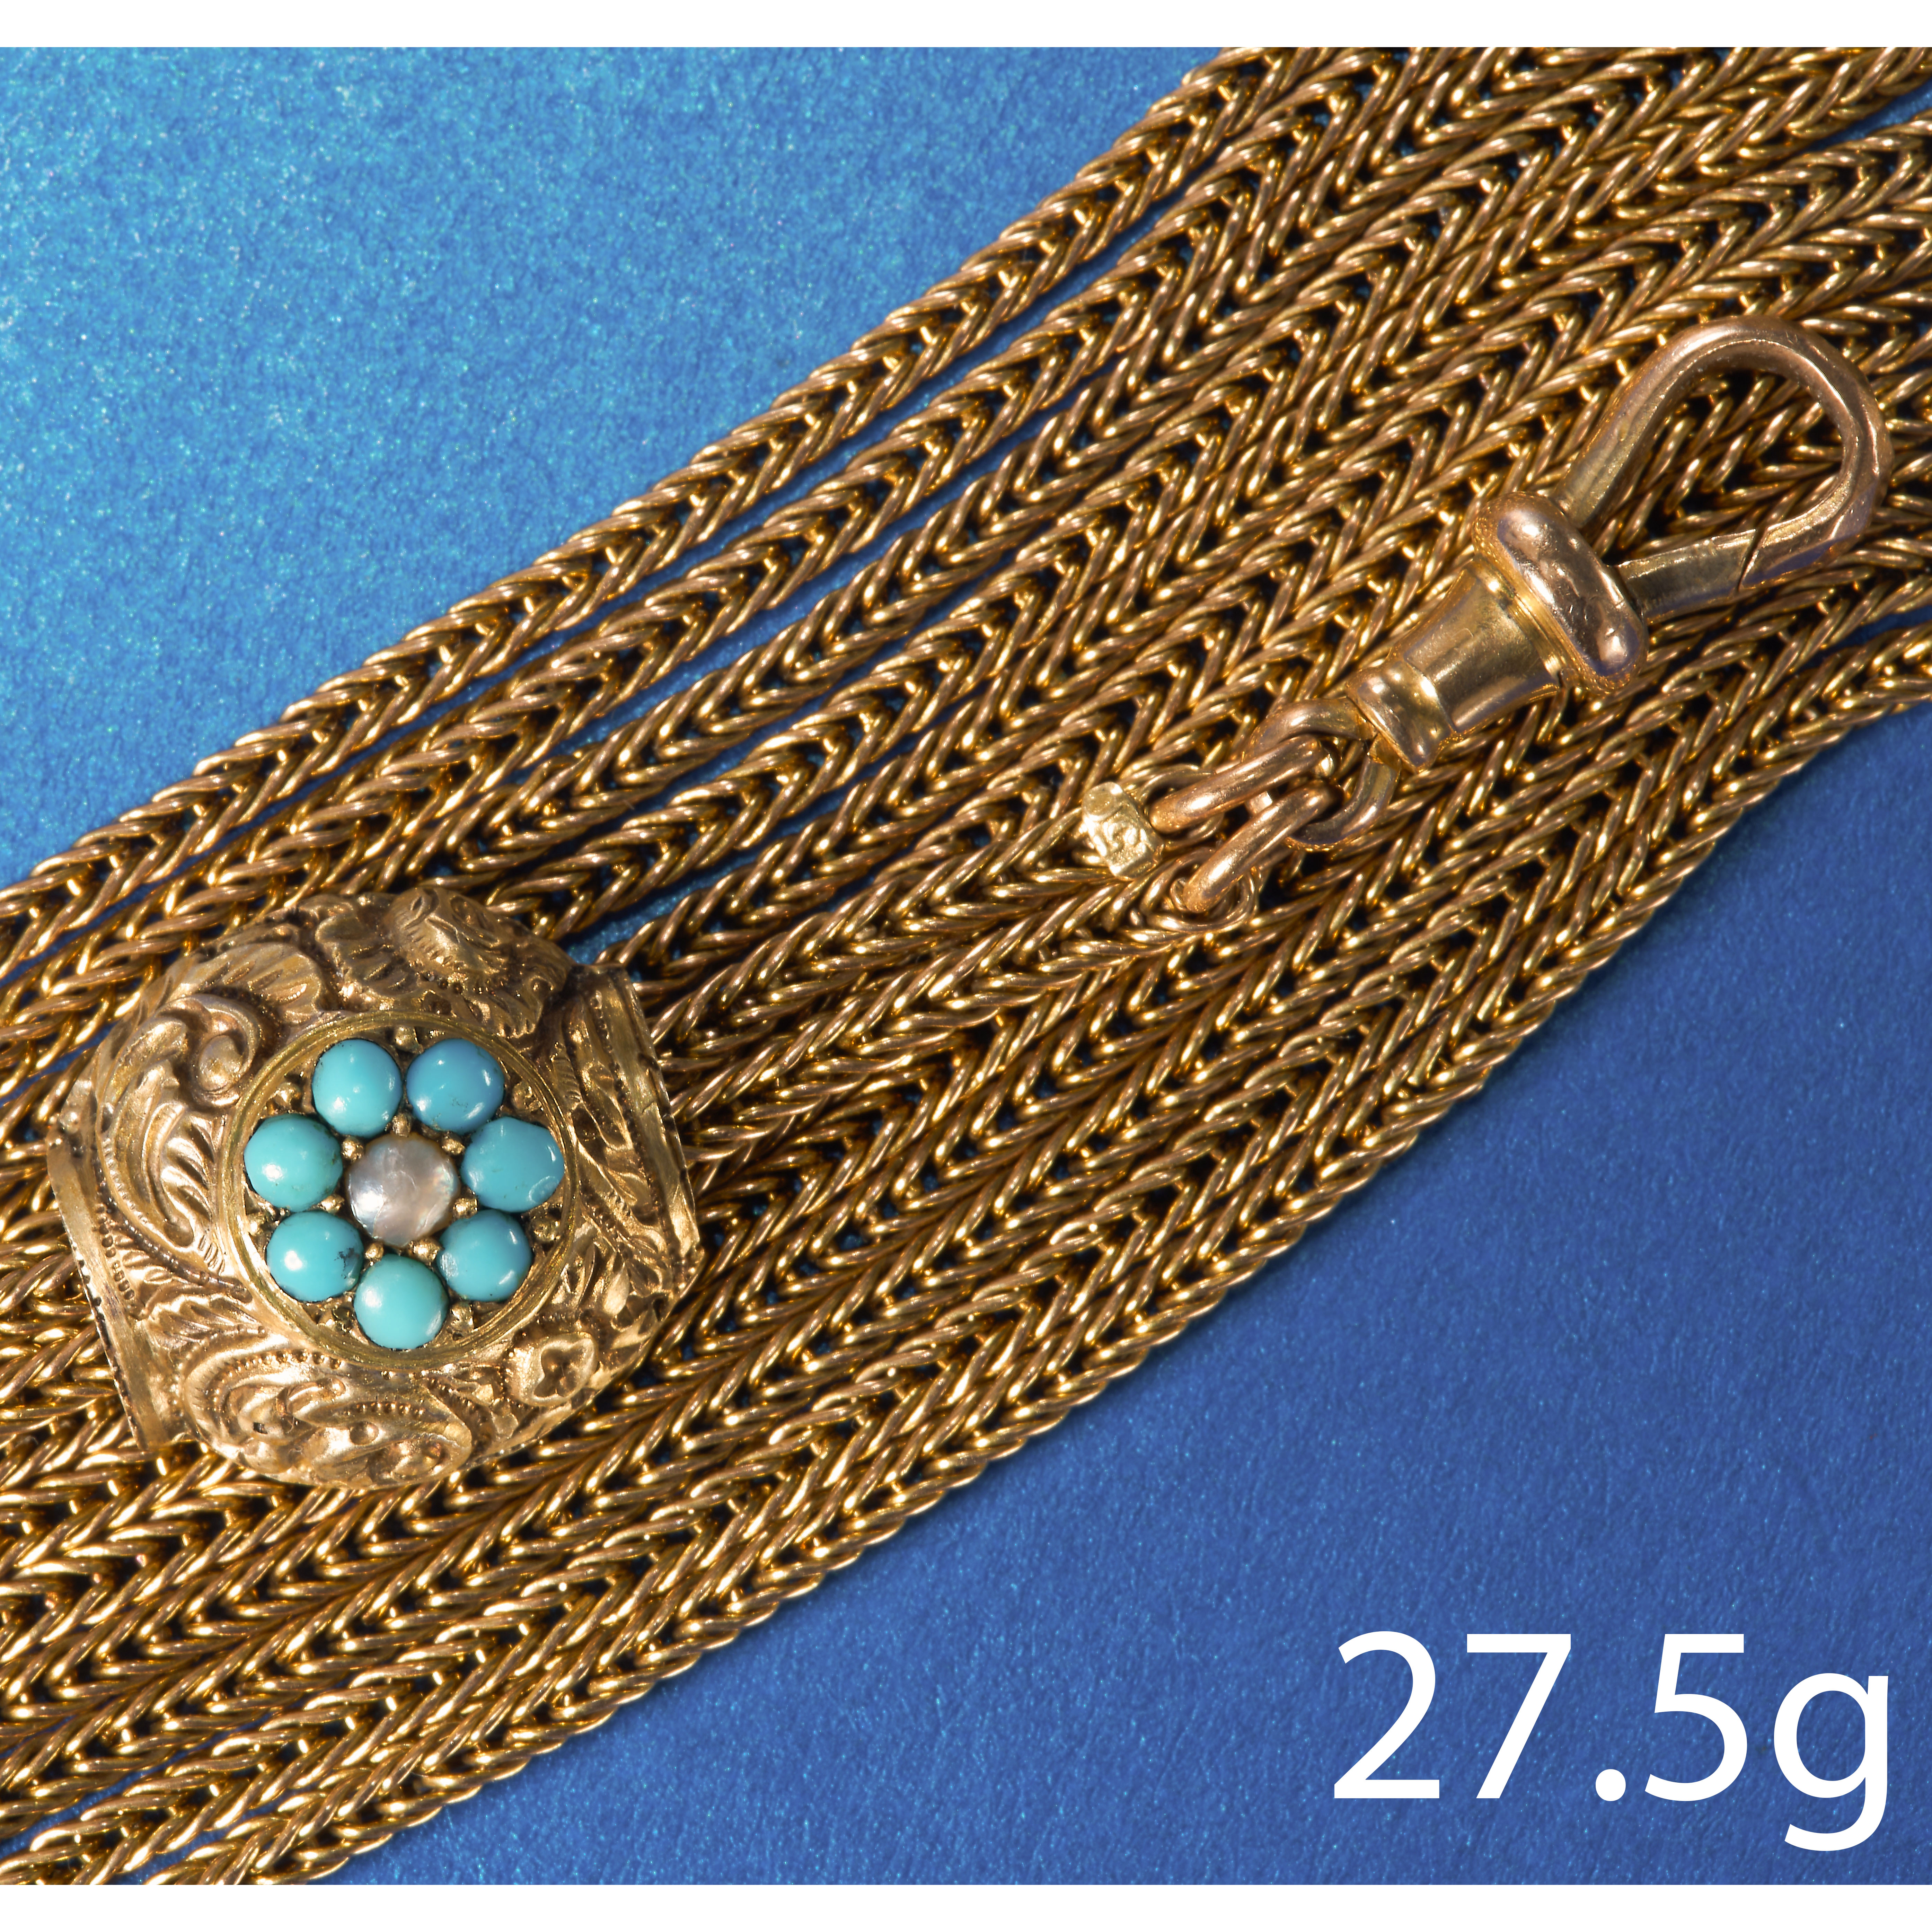 ANTIQUE GOLD GUARD CHAIN, WITH TURQUOISE SLIDER